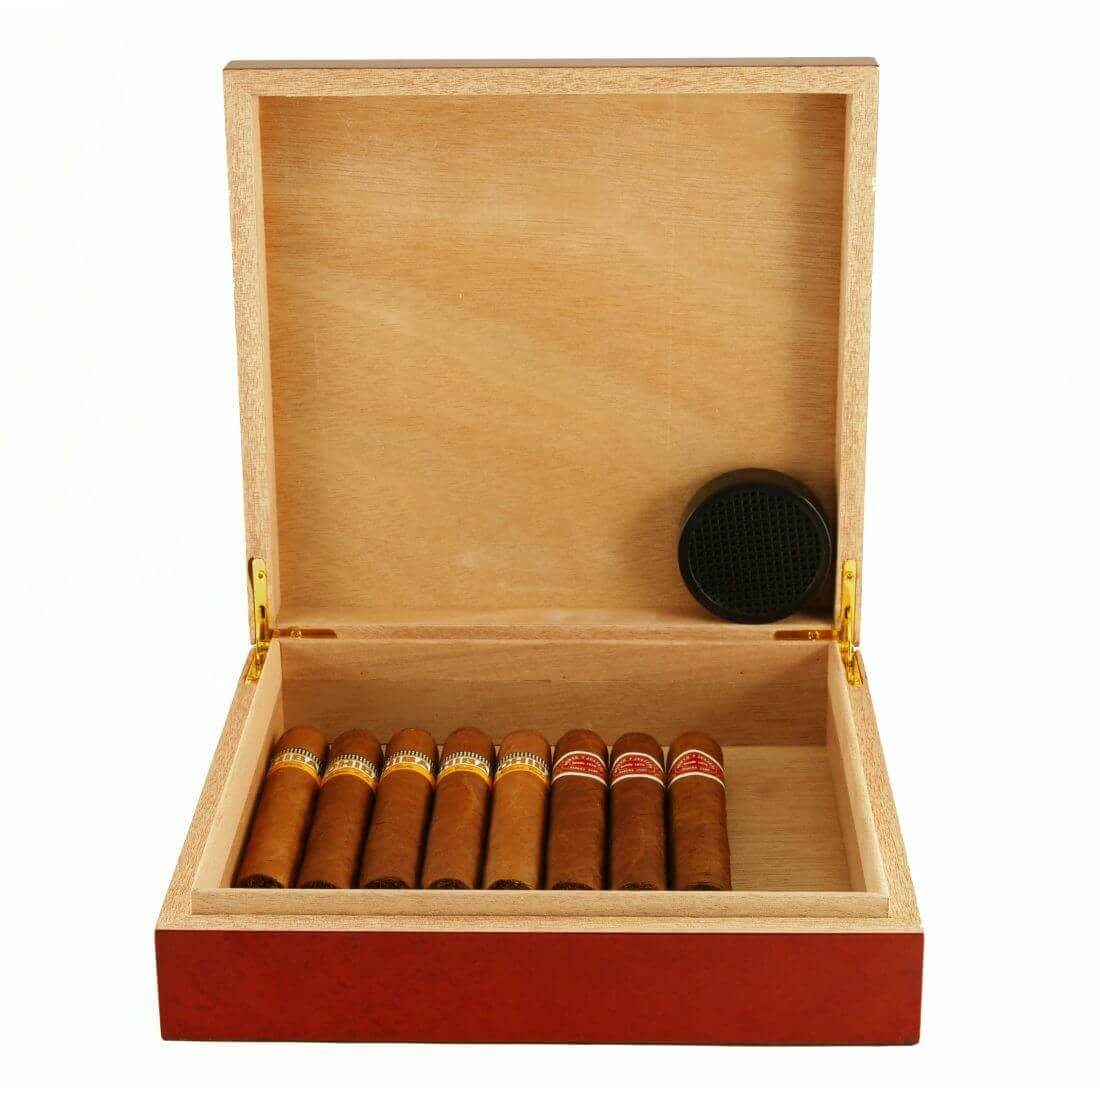 How To Buy Cigar Humidor Online